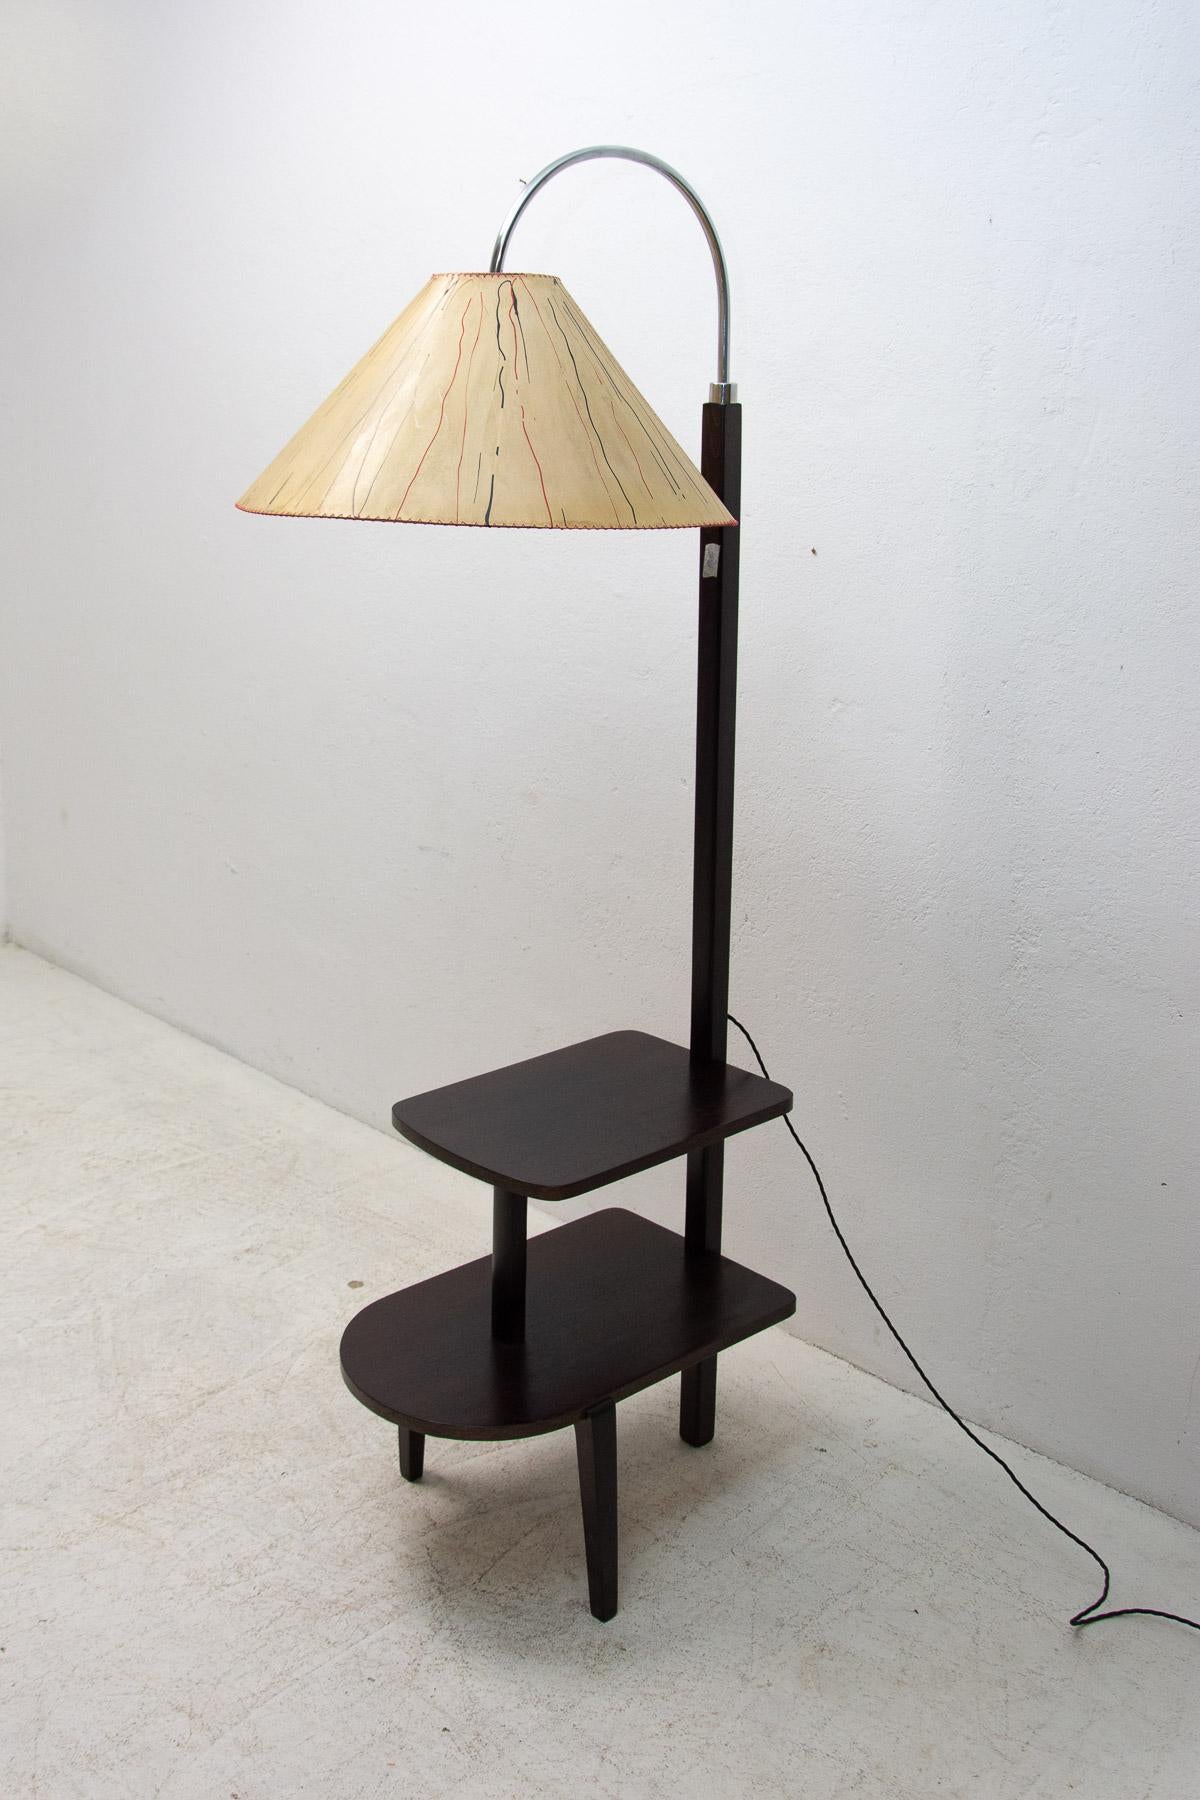 Thonet floor lamp ART DECO, cataloque No. D-623, made in Bohemia in 1920/1930´s. Chrome-plated rod with a wooden part – beech wood. Can be used also as a side table. Fully restored, new wiring, in high gloss finish. Missing a sticker. In excellent